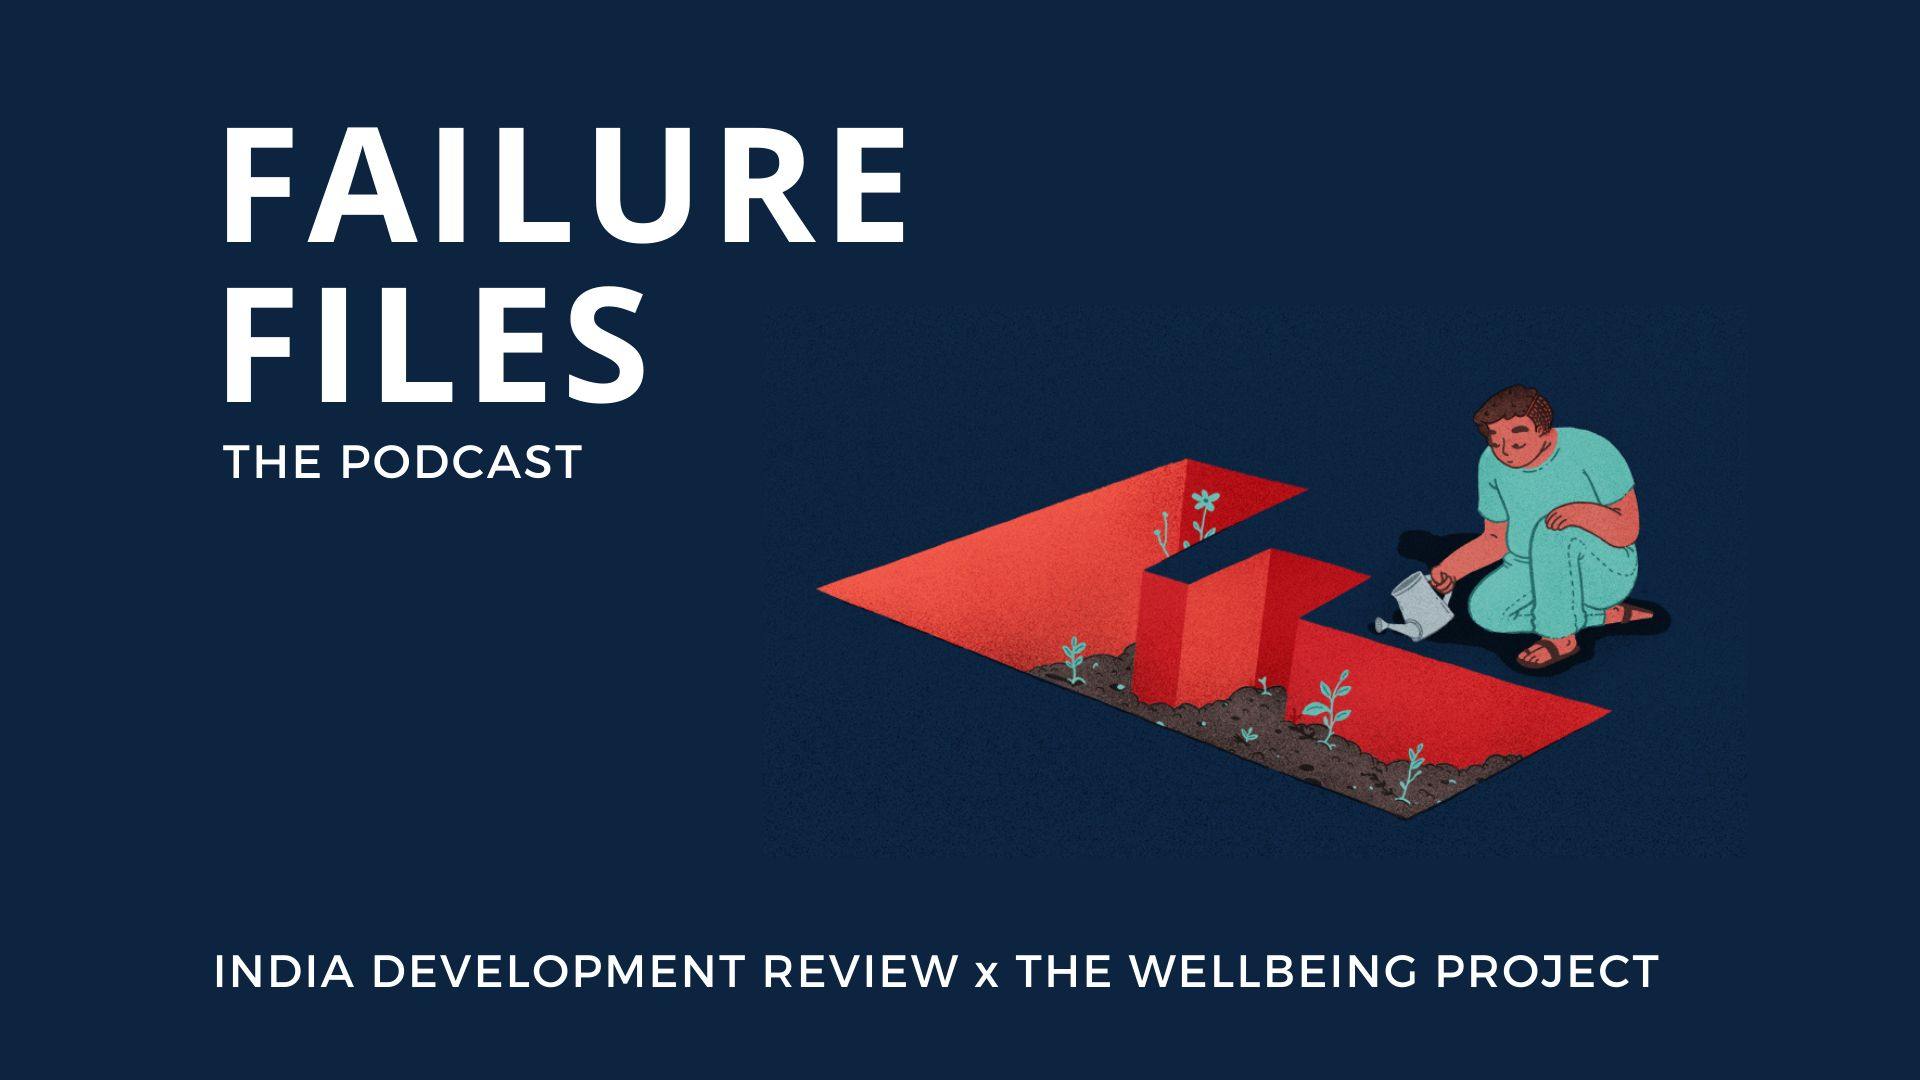 Failure Files podcast written on a dark blue background and an illustration of a person watering a bit F in the ground-caste